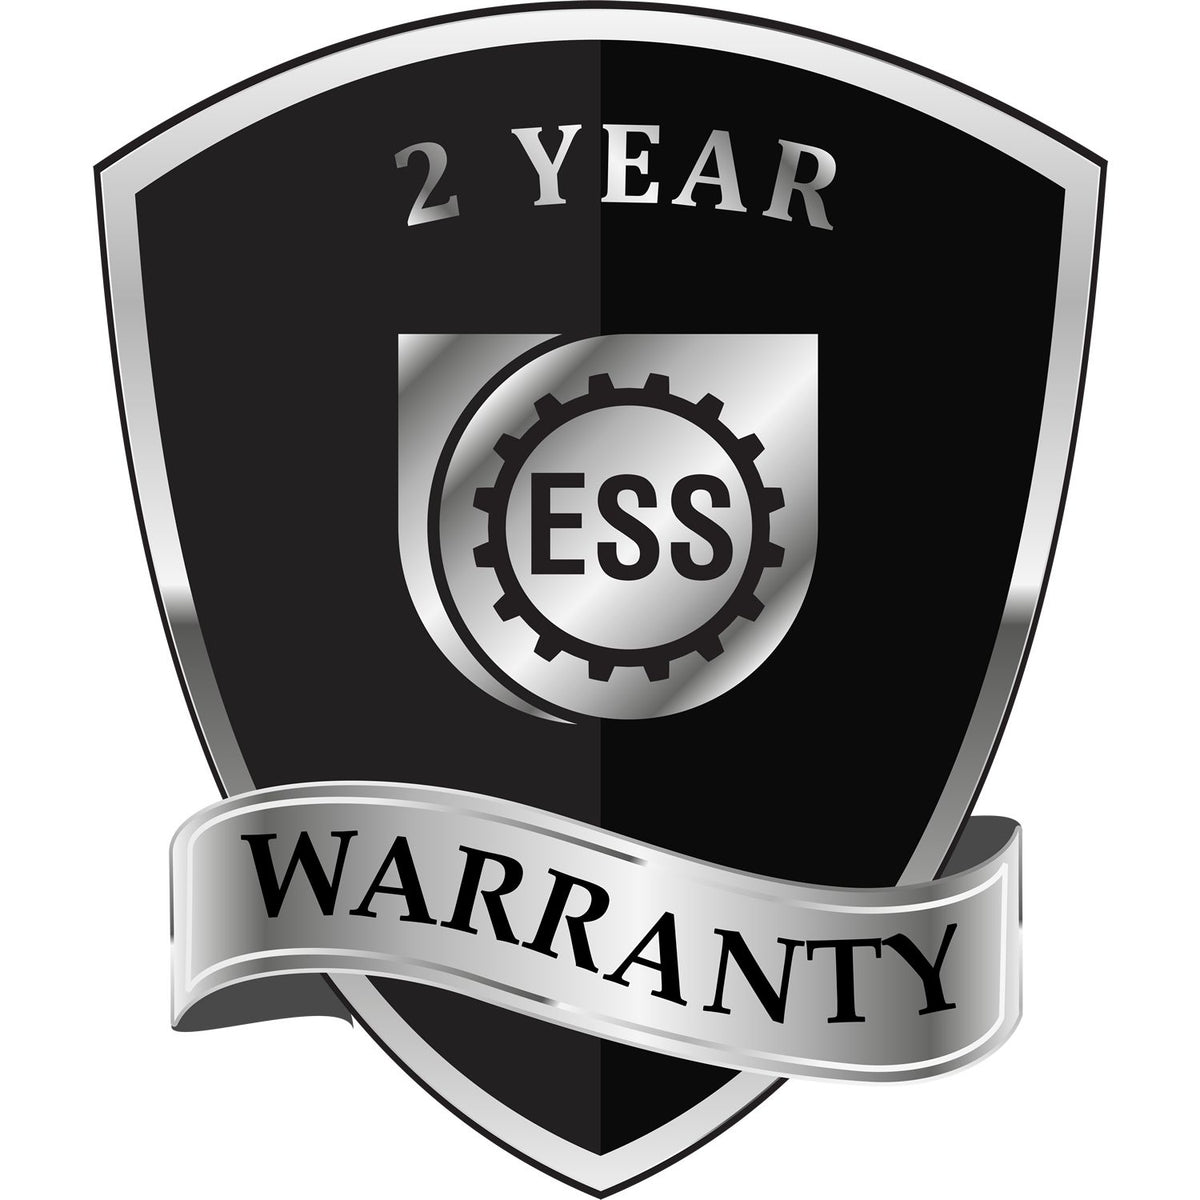 A badge or emblem showing a warranty icon for the Long Reach New Hampshire PE Seal